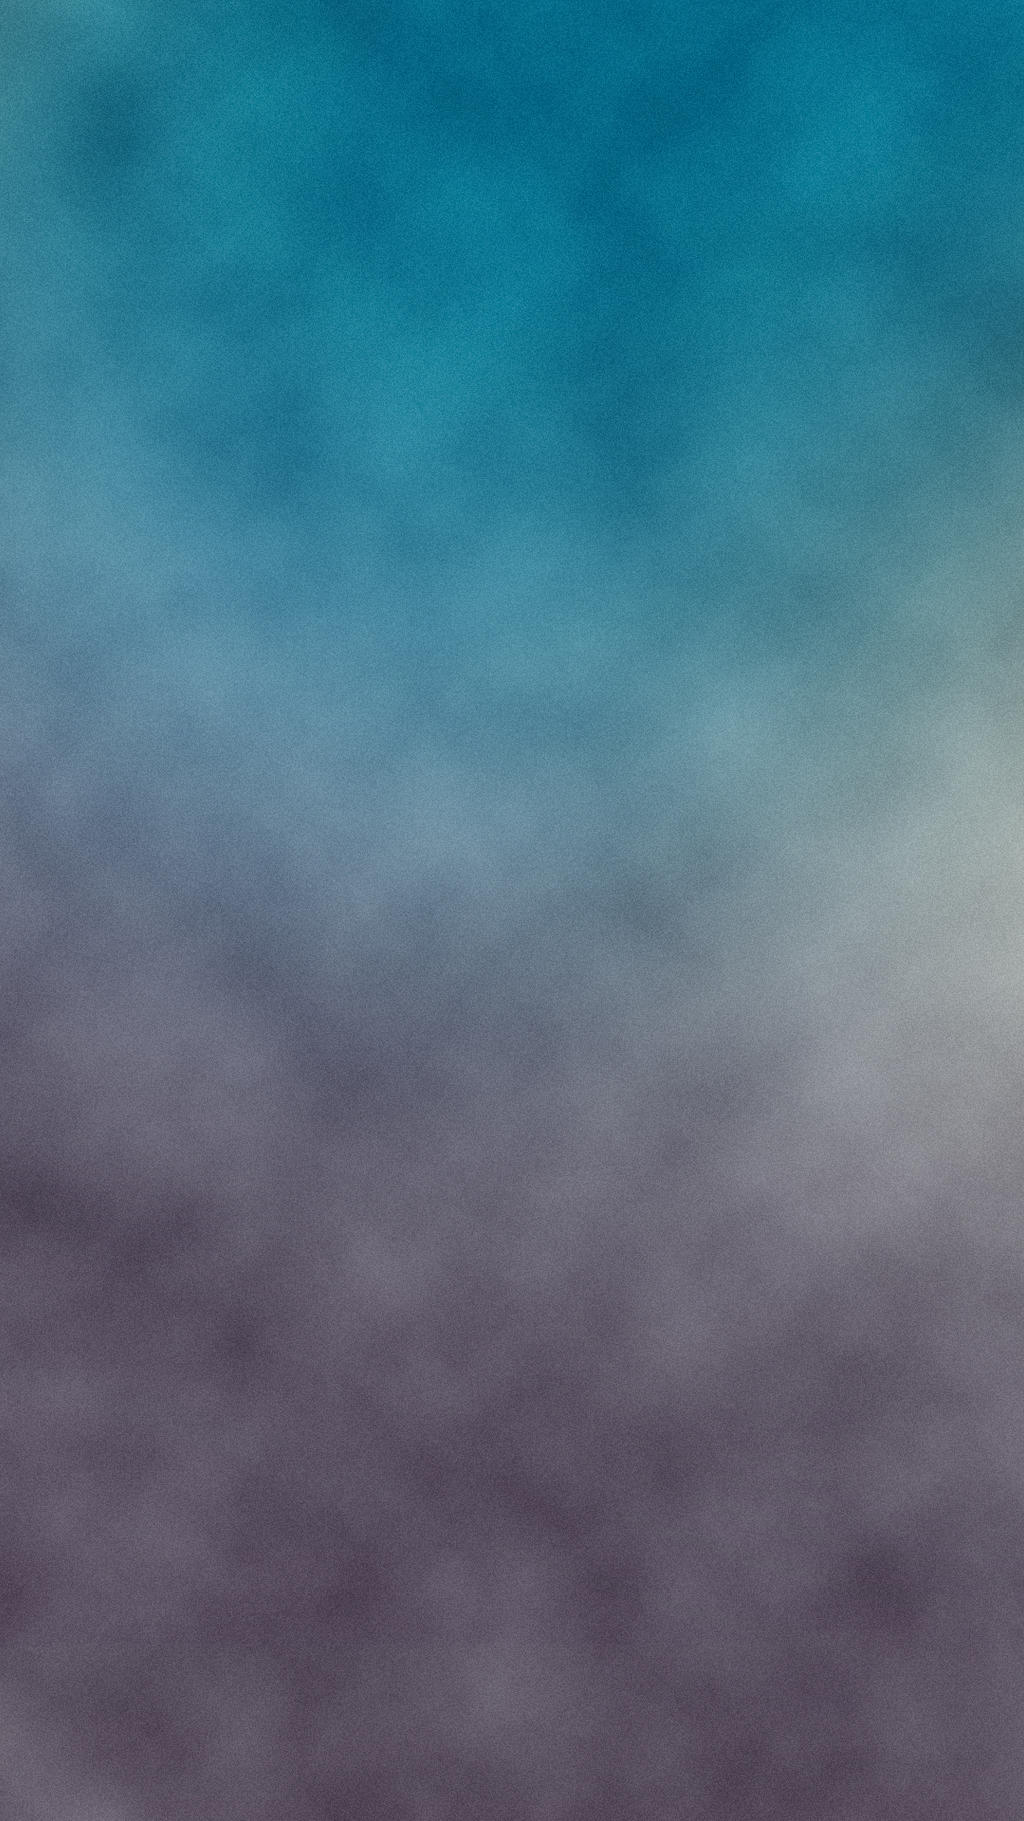 Abstract Texture Background Mobile HD Wallpaper2 by vactual on DeviantArt